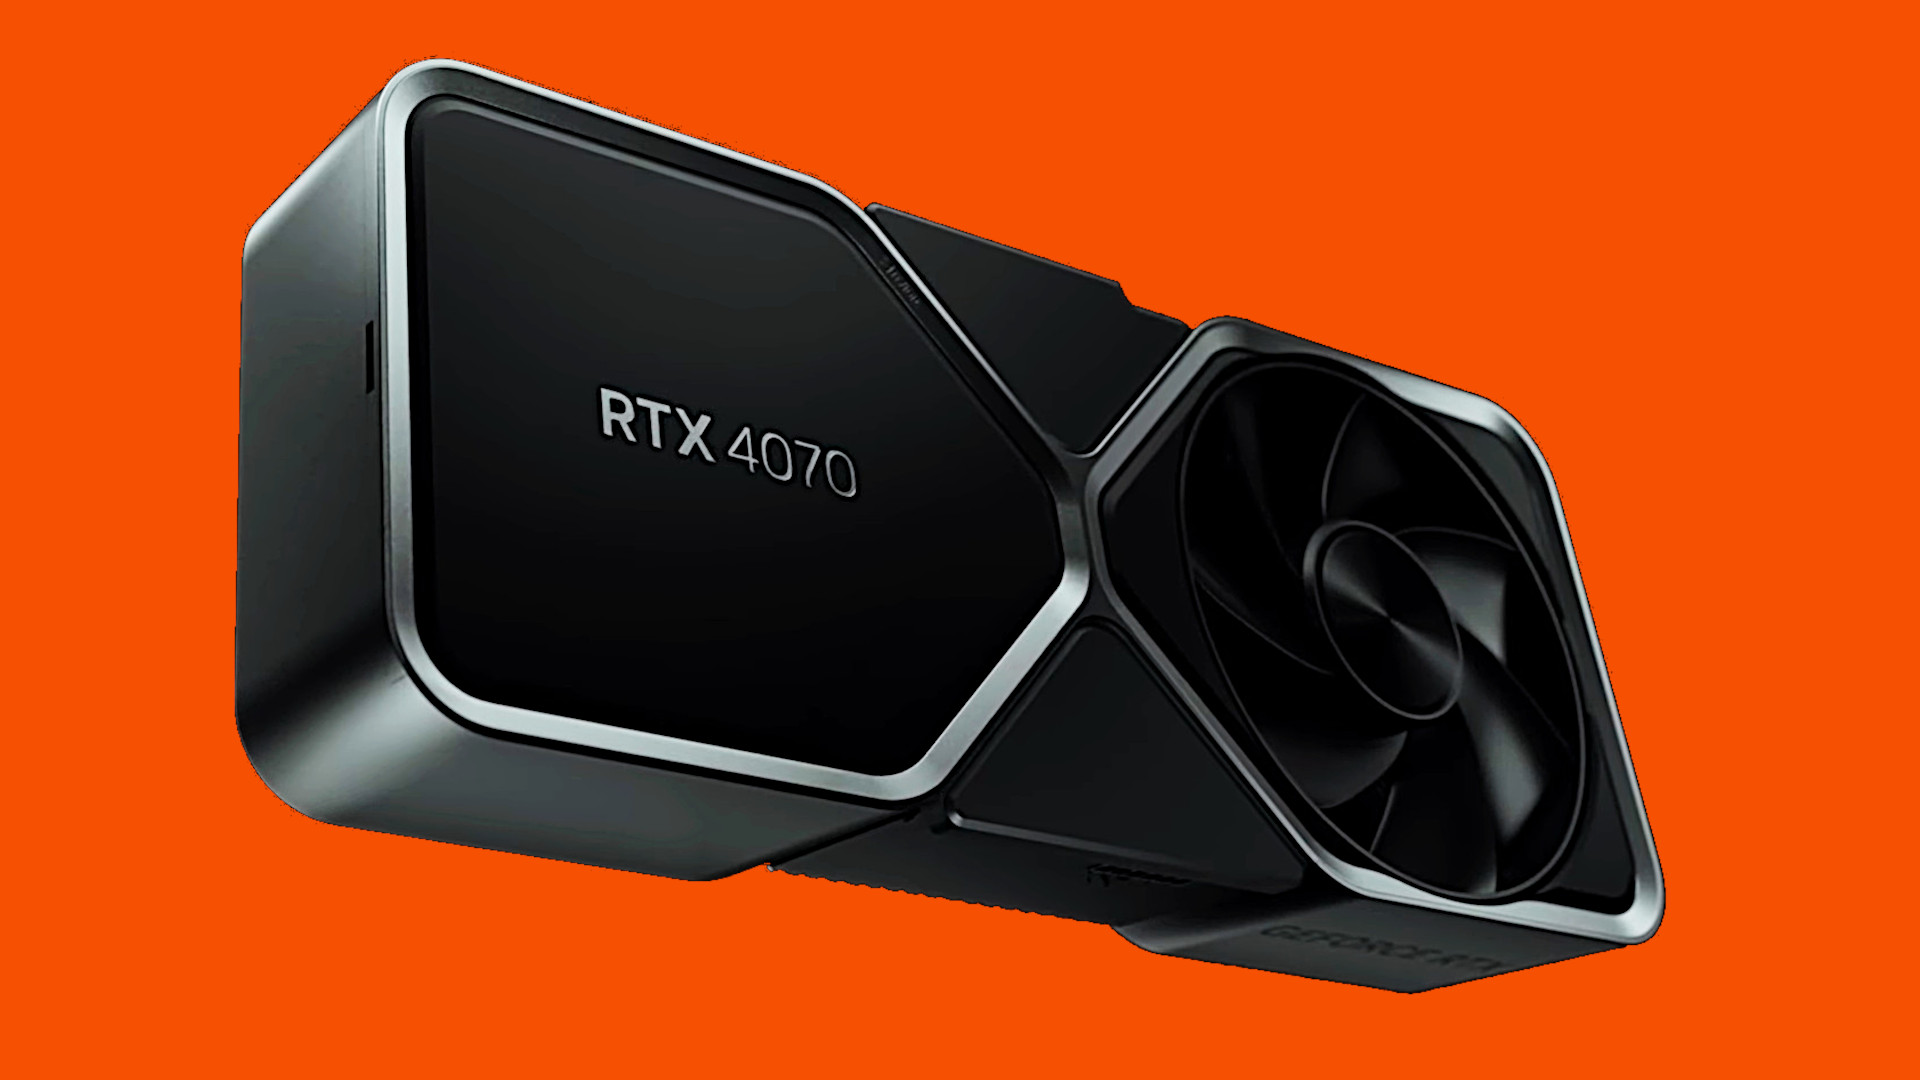 Nvidia corrects mistake with one of its new RTX 40 Super GPUs